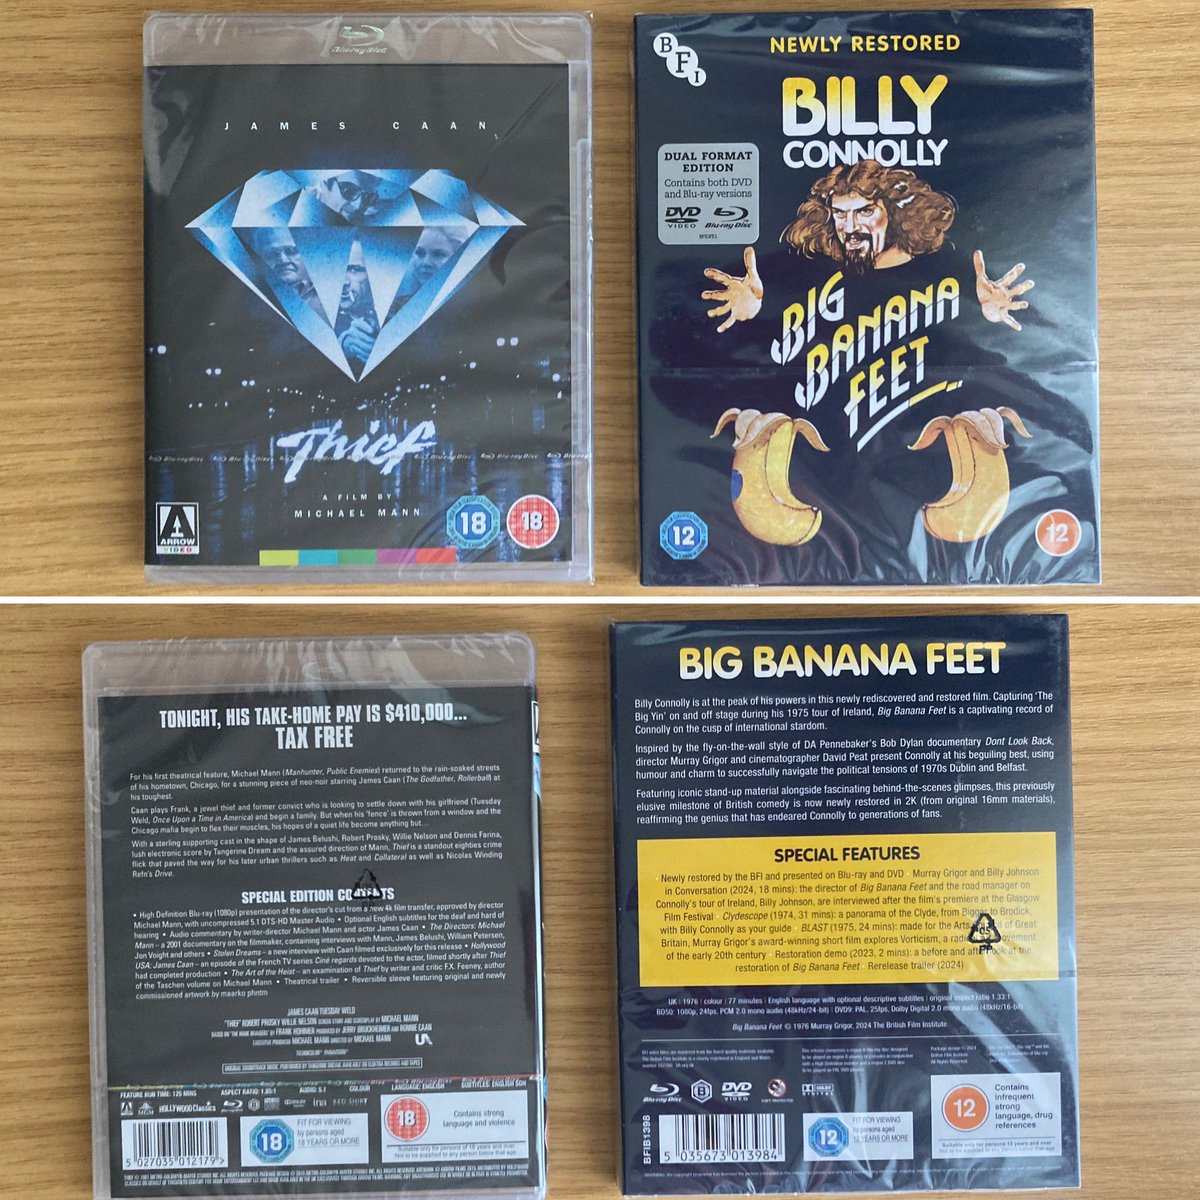 Cop yer whack for this! #LatestAdditions to my #BlurayCollection are @BFI’s newly restored #BillyConnolly #BigBananaFeet as well as @ArrowFilmsVideo’s special edition of #MichaelMann’s #Thief… can’t wait to watch them! #Bluray #PhysicalMedia #KeepDiscsAlive